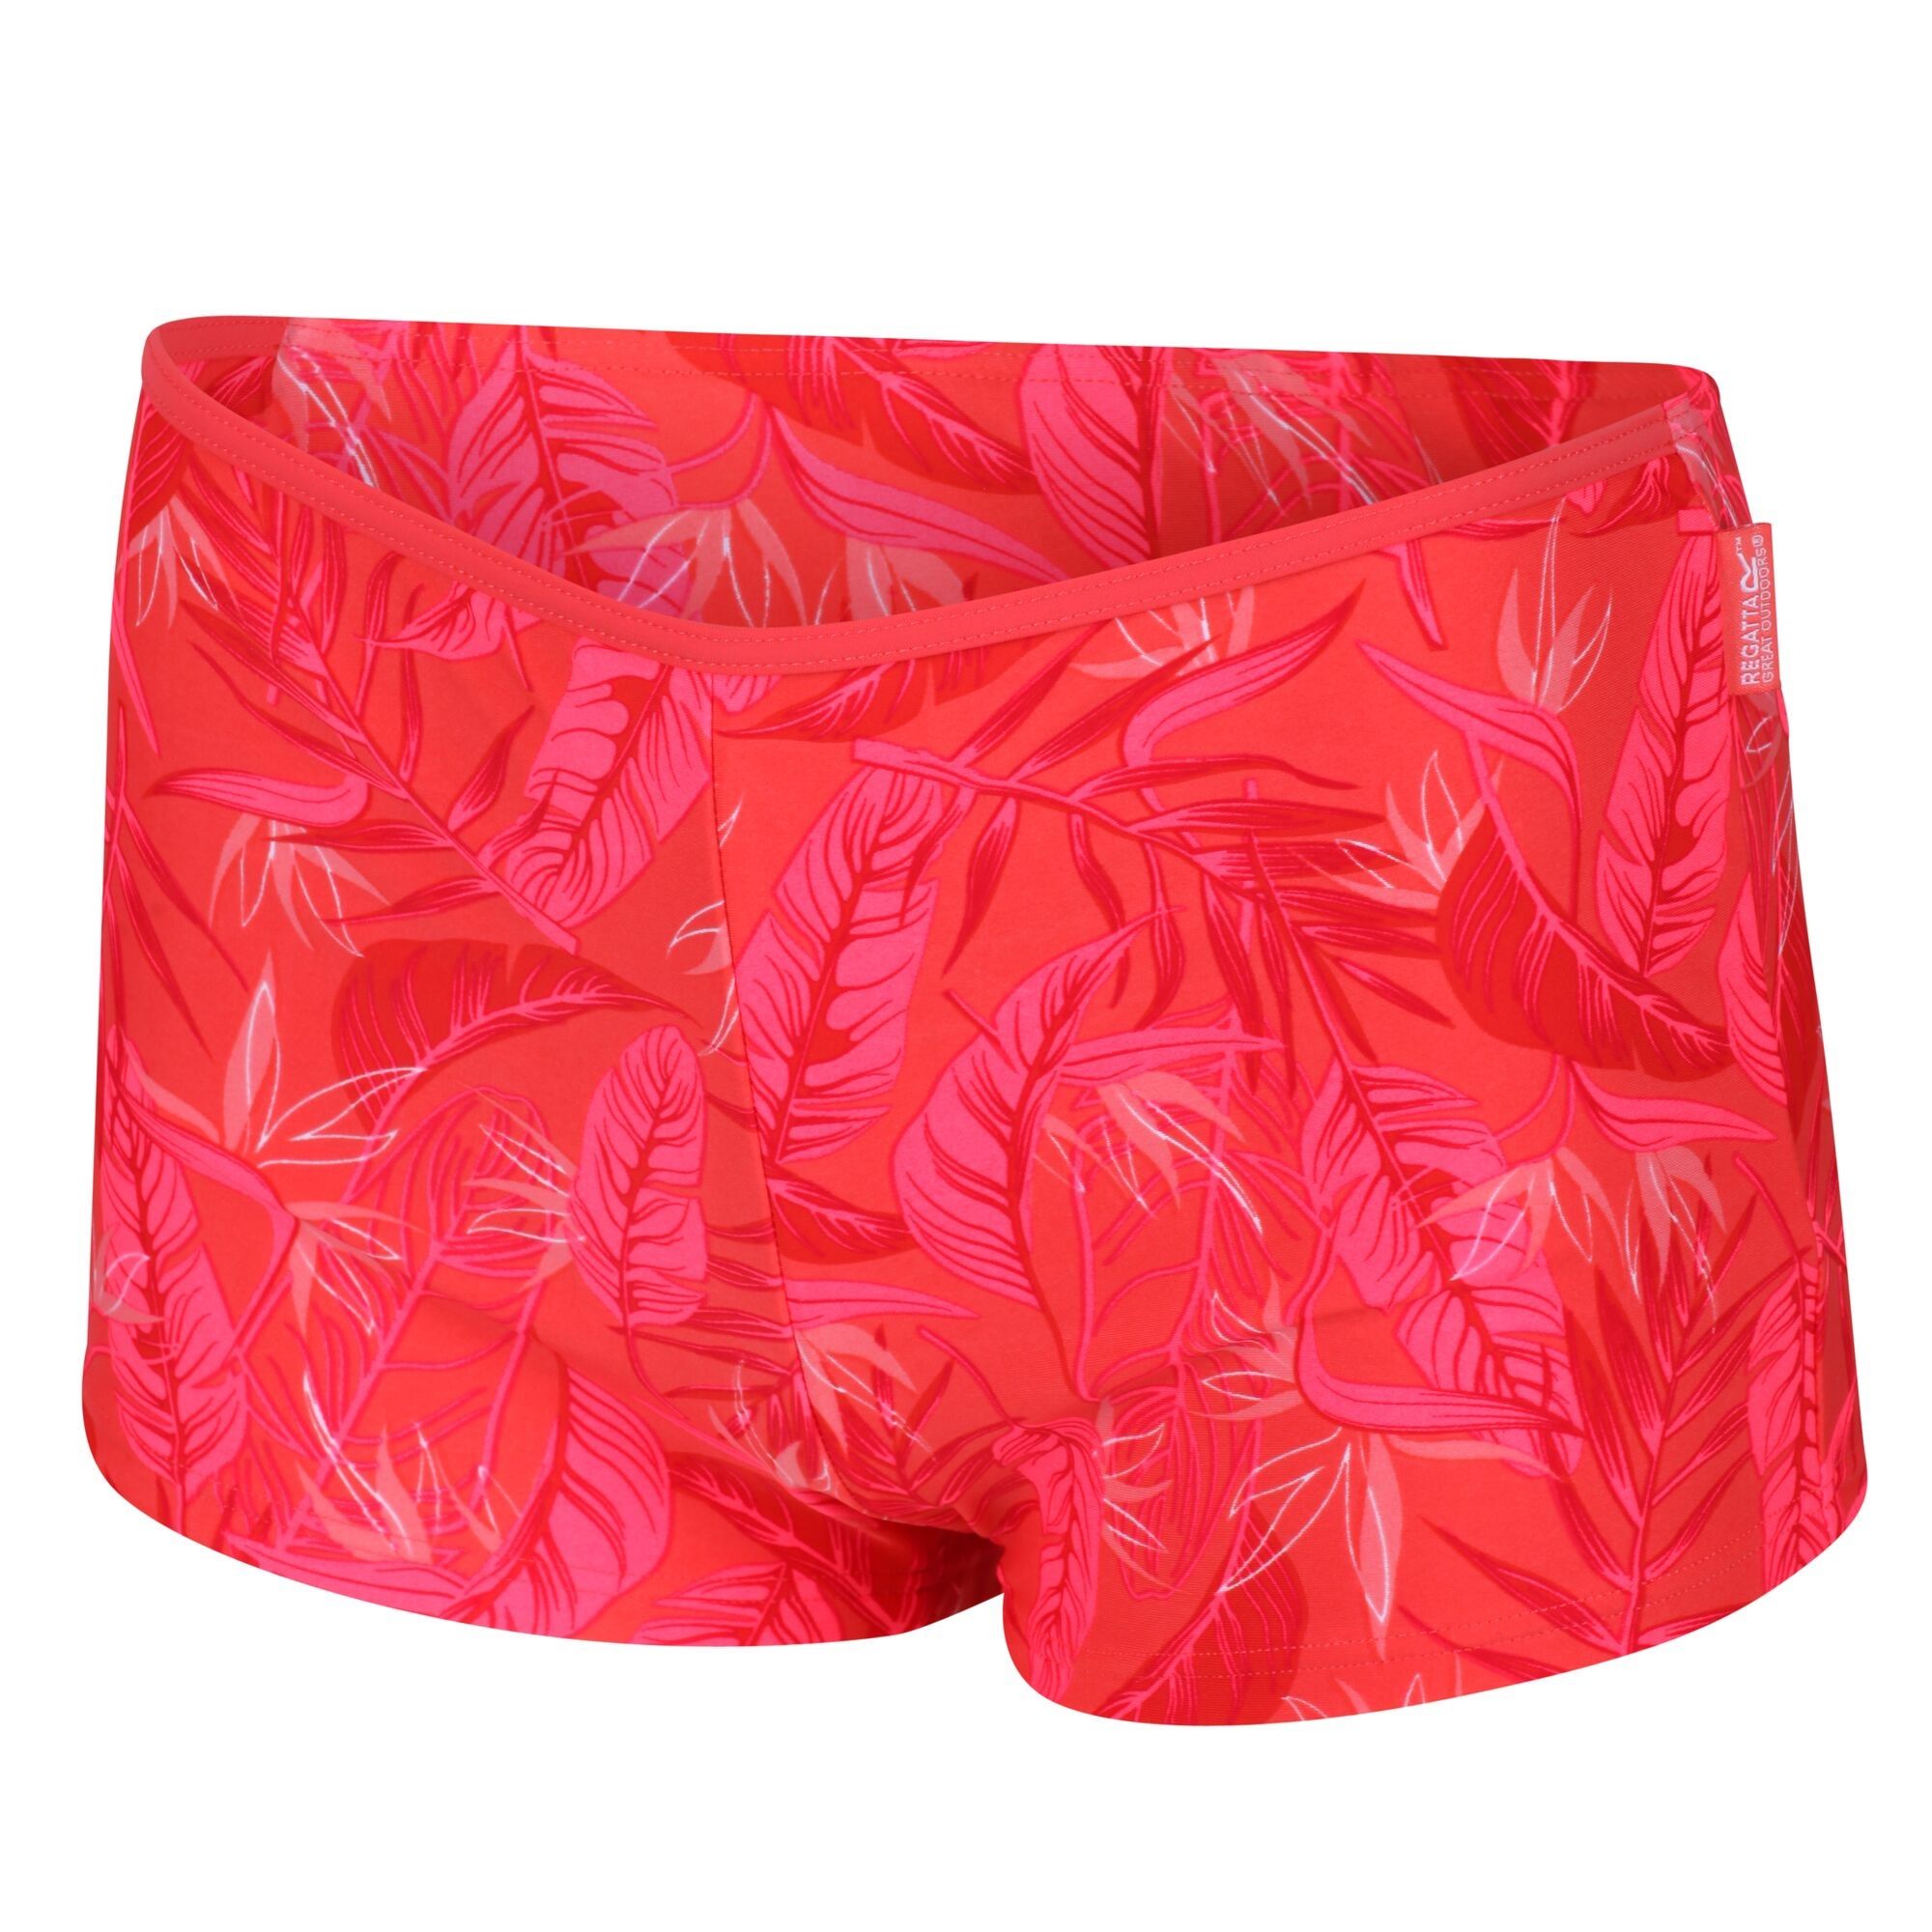 80% polyamide, 20% elastane. Mix and match your favourite styles from the Regatta Aceana Collection to create your perfect two-piece swimsuit. The Aceana Bikini Shorts are made of soft-touch stretch fabric cut to sit above the hip and cover the bottom. With a slim contrast colour band around the waist and small Regatta tab on the left hip. Regatta Womens sizing (waist approx): 6 (23in/58cm), 8 (25in/63cm), 10 (27in/68cm), 12 (29in/74cm), 14 (31in/79cm), 16 (33in/84cm), 18 (36in/91cm), 20 (38in/96cm), 22 (41in/104cm), 24 (43in/109cm), 26 (45in/114cm), 28 (47in/119cm), 30 (49in/124cm), 32 (51in/129cm), 34 (53in/135cm), 36 (55in/140cm).